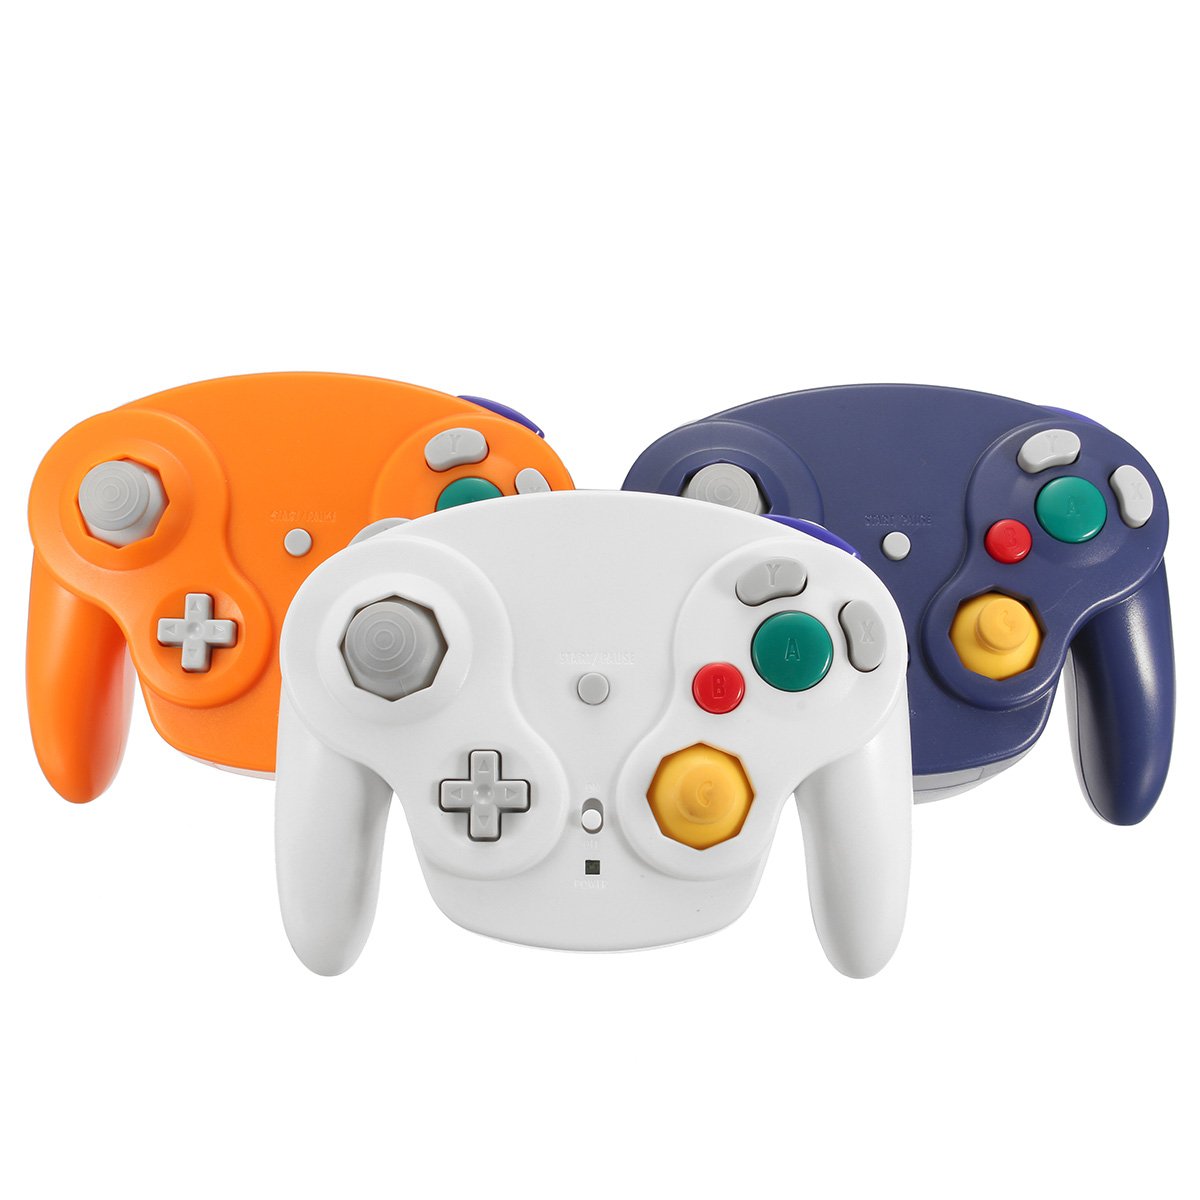 2.4Ghz Wireless Controller Game Gamepad For Nintendo Gamecube NGC Wii 2